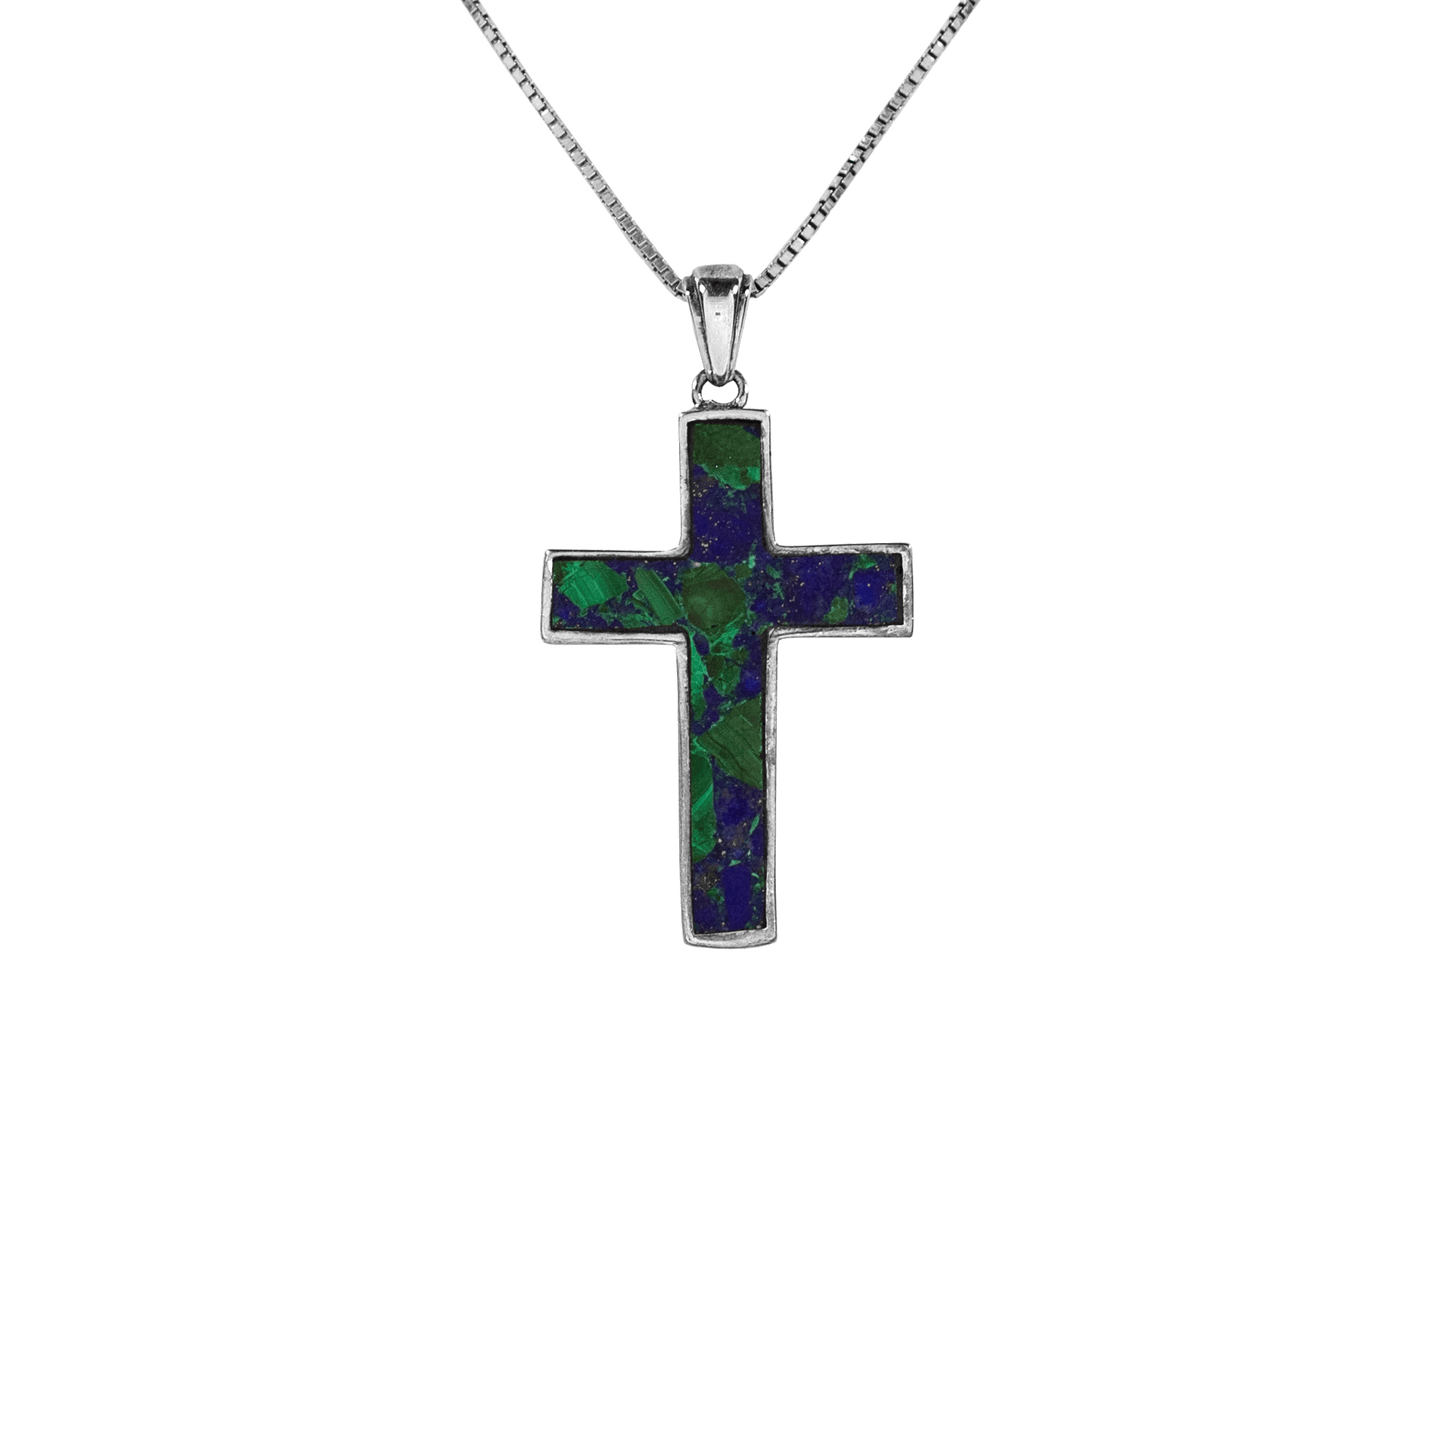 Eilat Stone Cross necklace on sterling silver chain